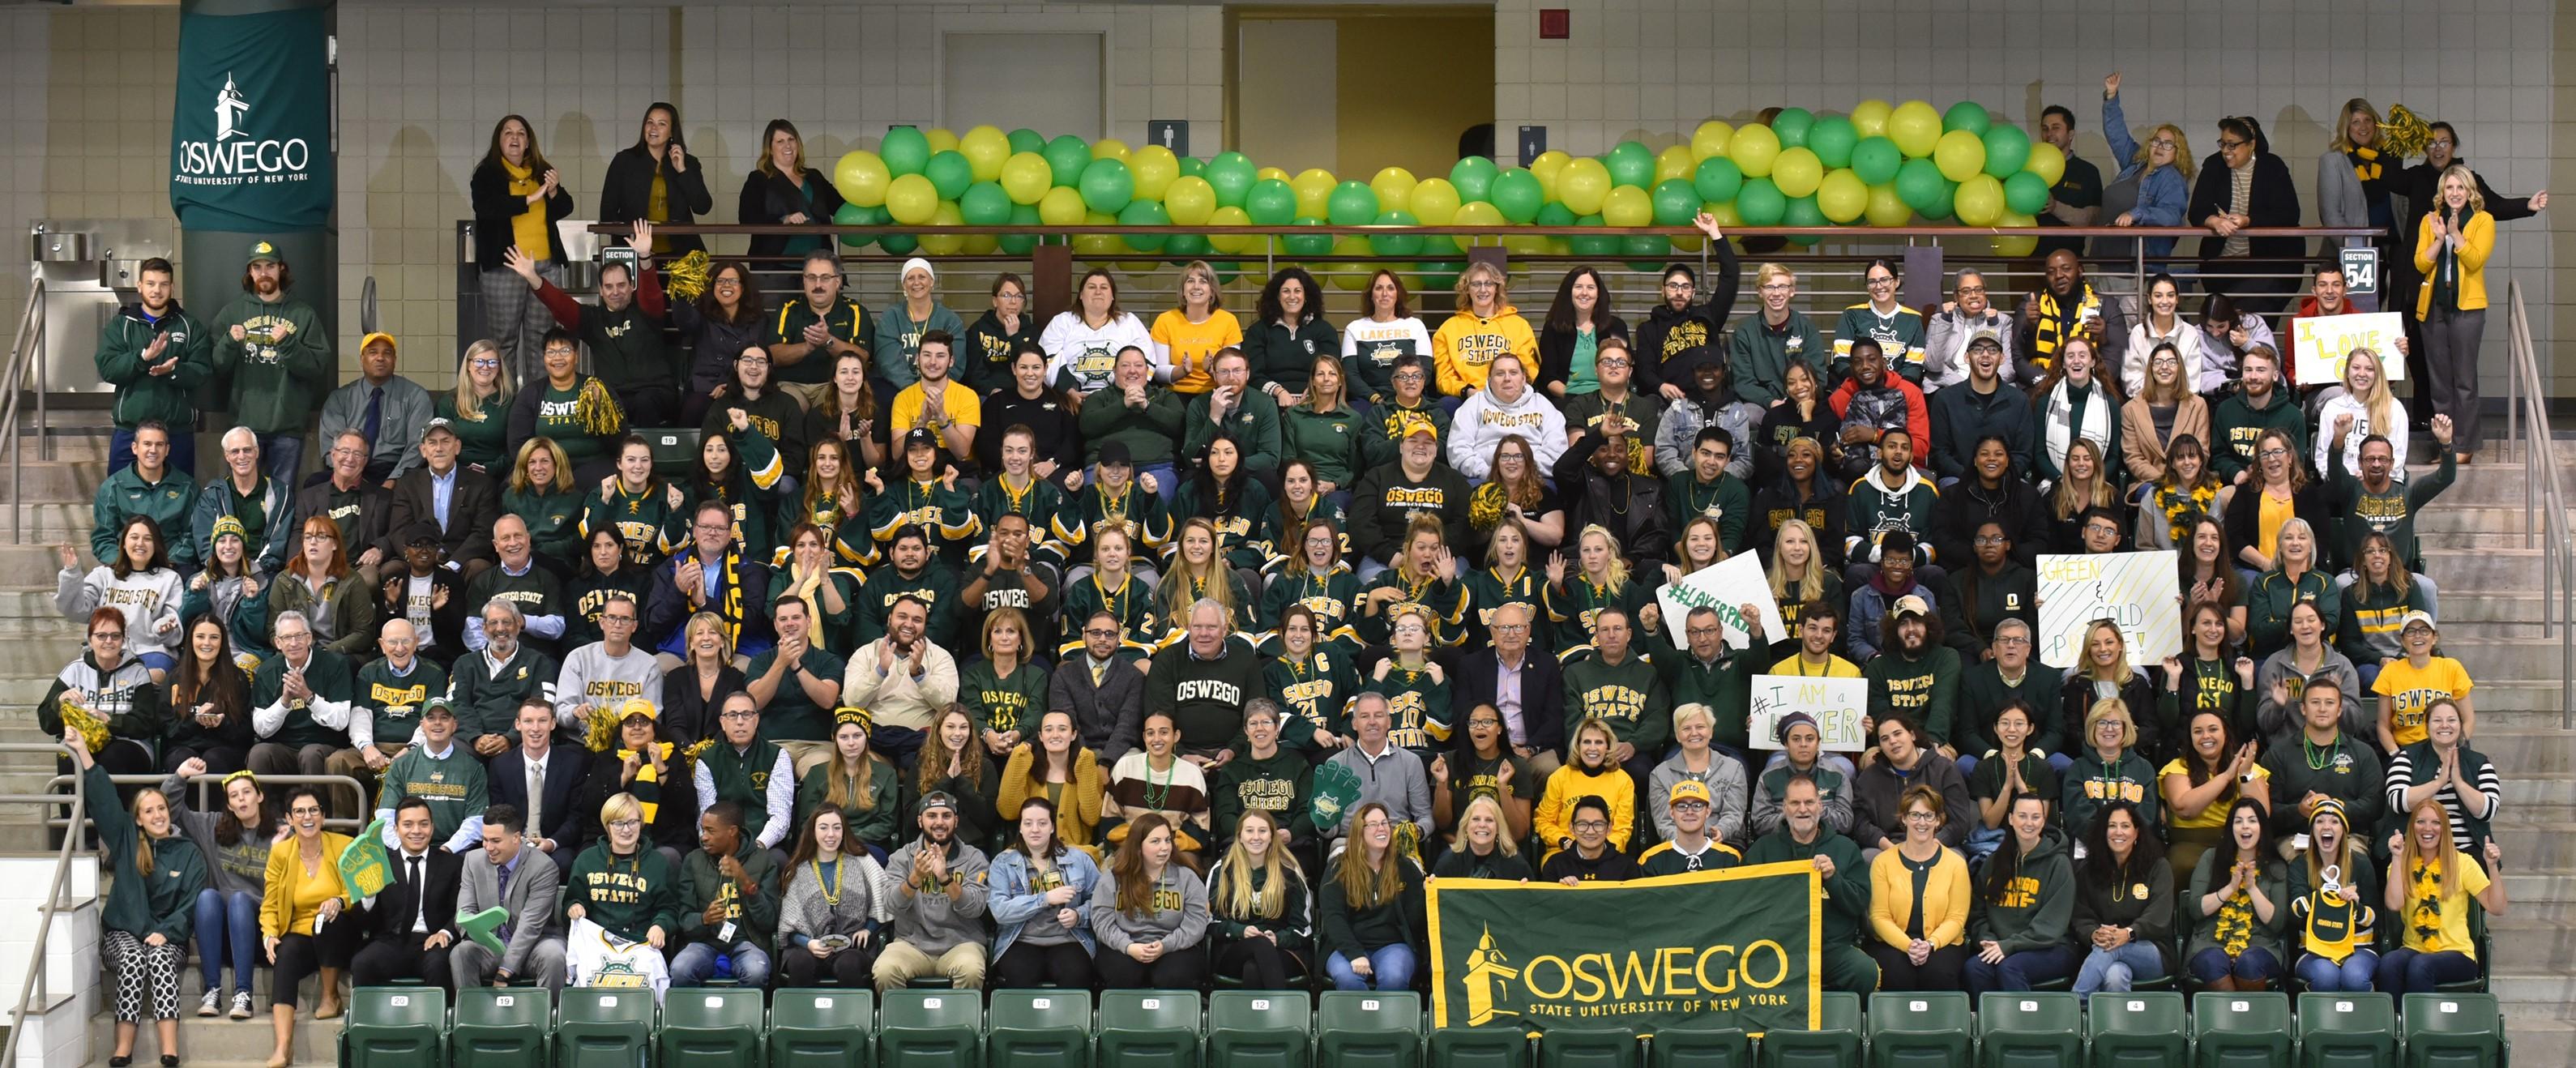 Group of students, faculty, staff and alumni in green and gold